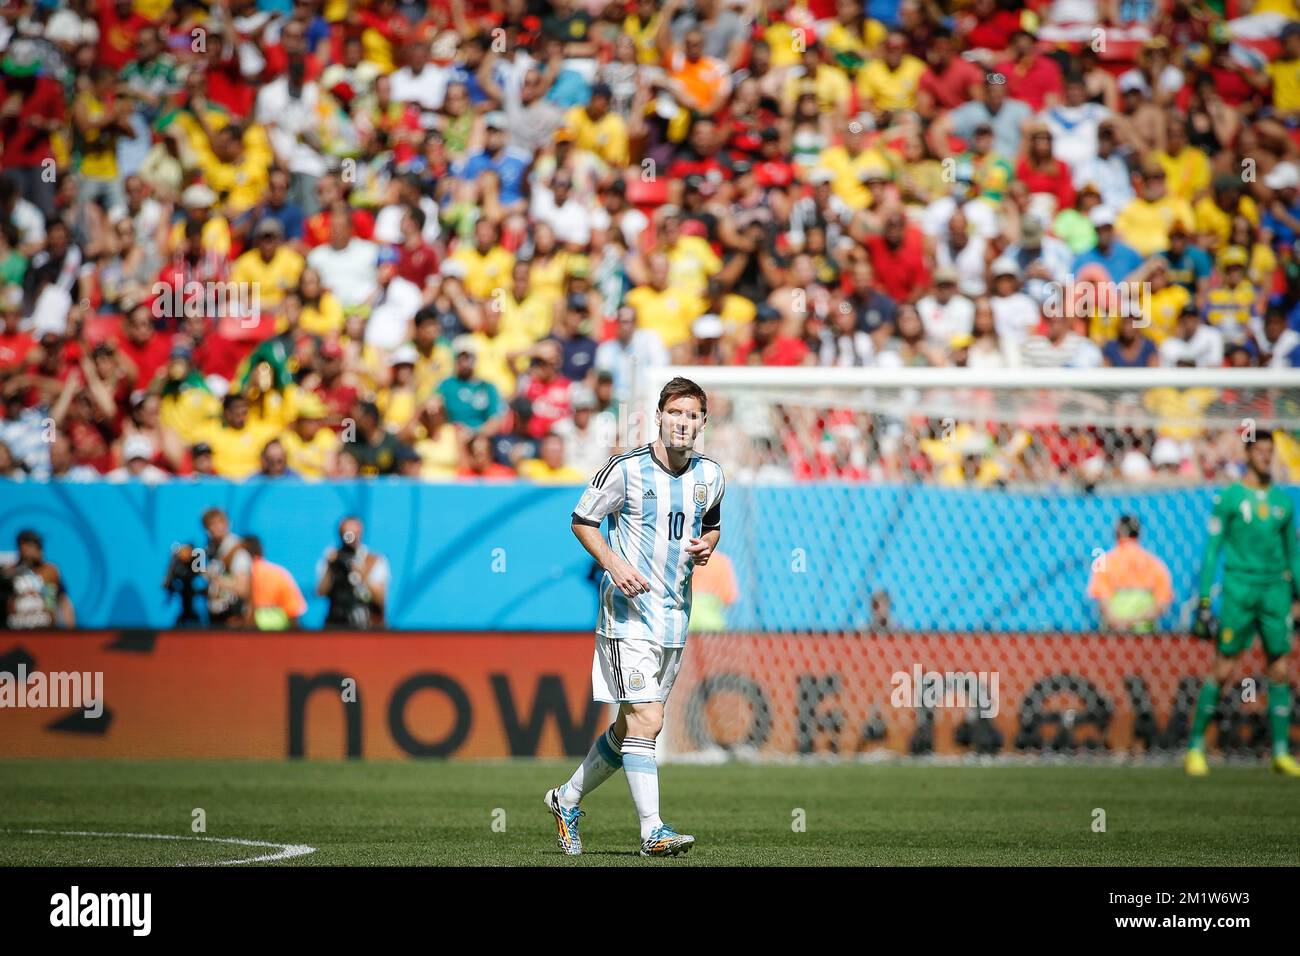 Argentina's Lionel Messi pictured during the quarter final match between Belgian national soccer team Red Devils and Argentina, in Estadio Nacional Mane Garrincha, in Brasilia, Brazil, during the 2014 FIFA World Cup, Saturday 05 July 2014. BELGA PHOTO BRUNO FAHY Stock Photo